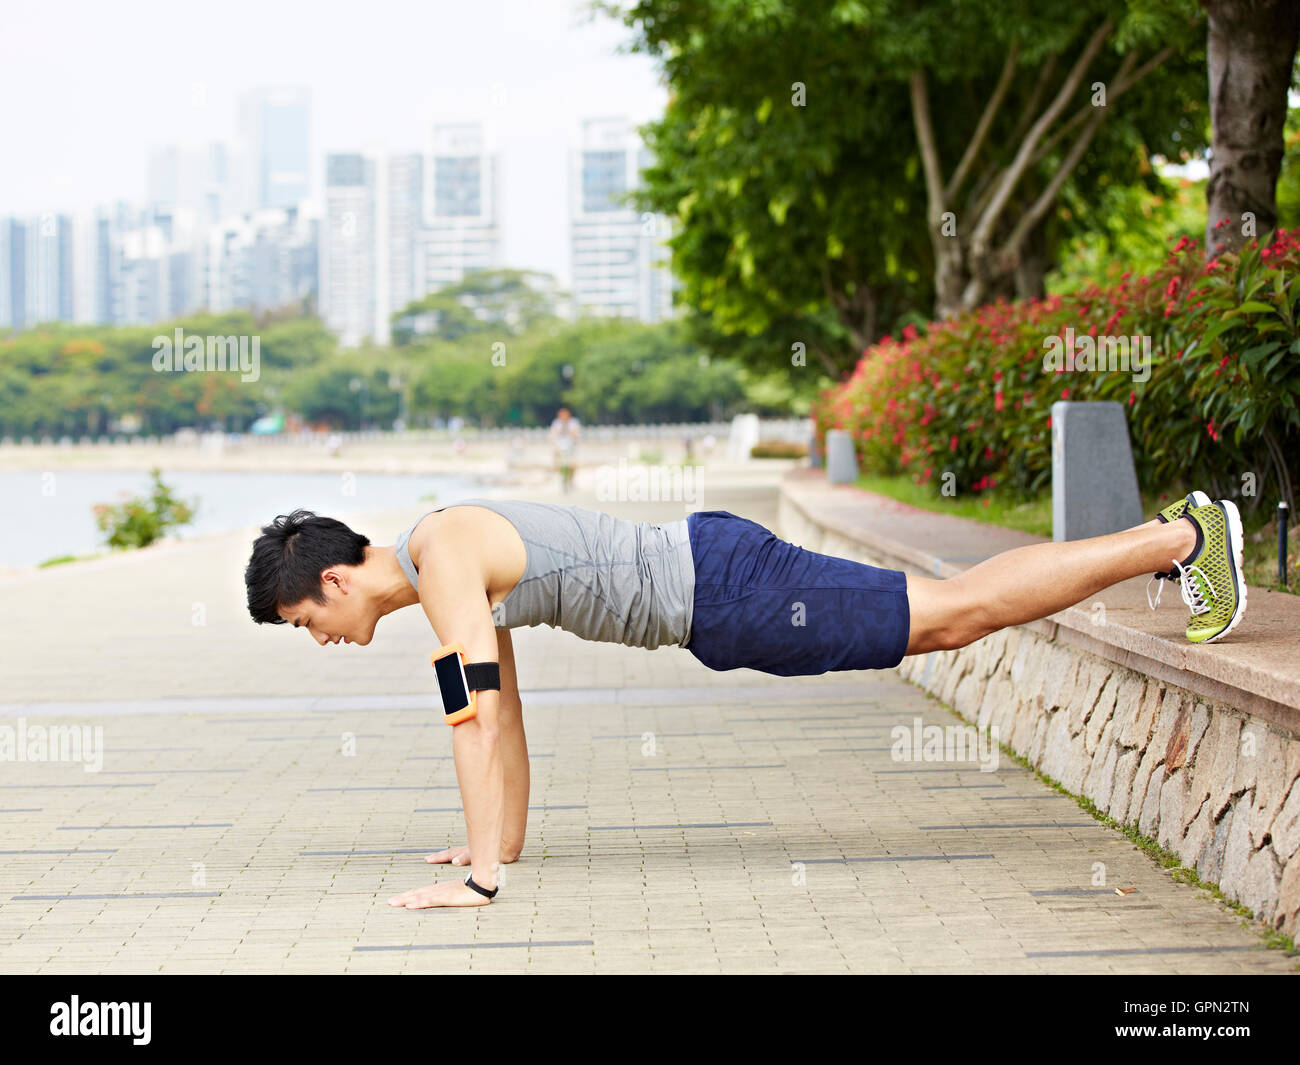 asian young man doing exercising by doing push-ups in a city park Stock Photo